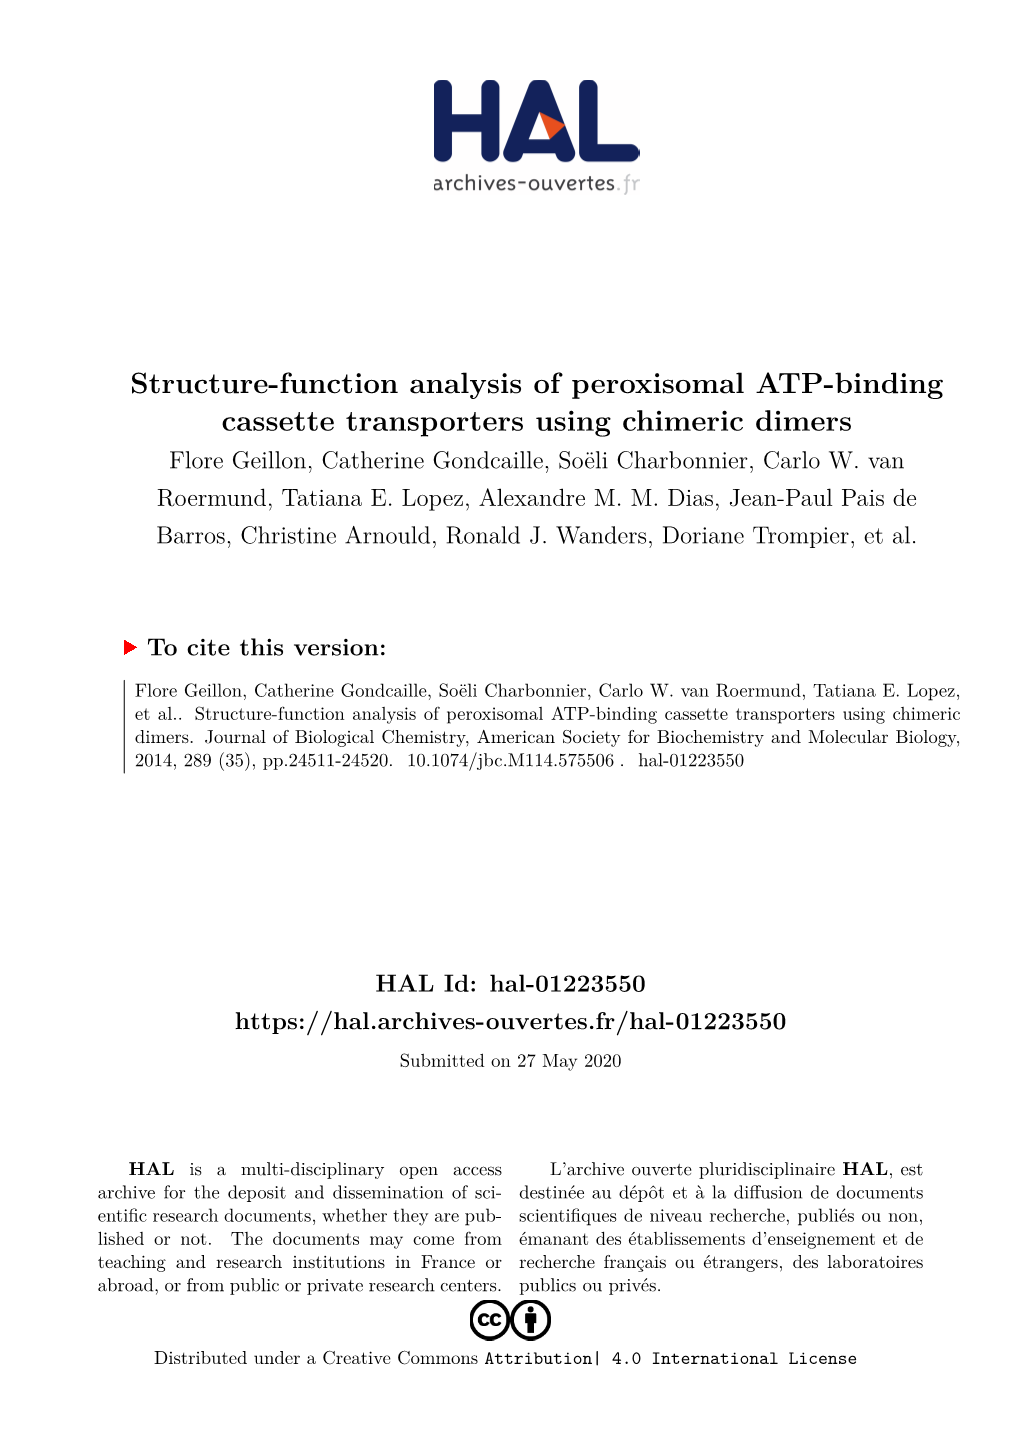 Structure-Function Analysis of Peroxisomal ATP-Binding Cassette Transporters Using Chimeric Dimers Flore Geillon, Catherine Gondcaille, Soëli Charbonnier, Carlo W